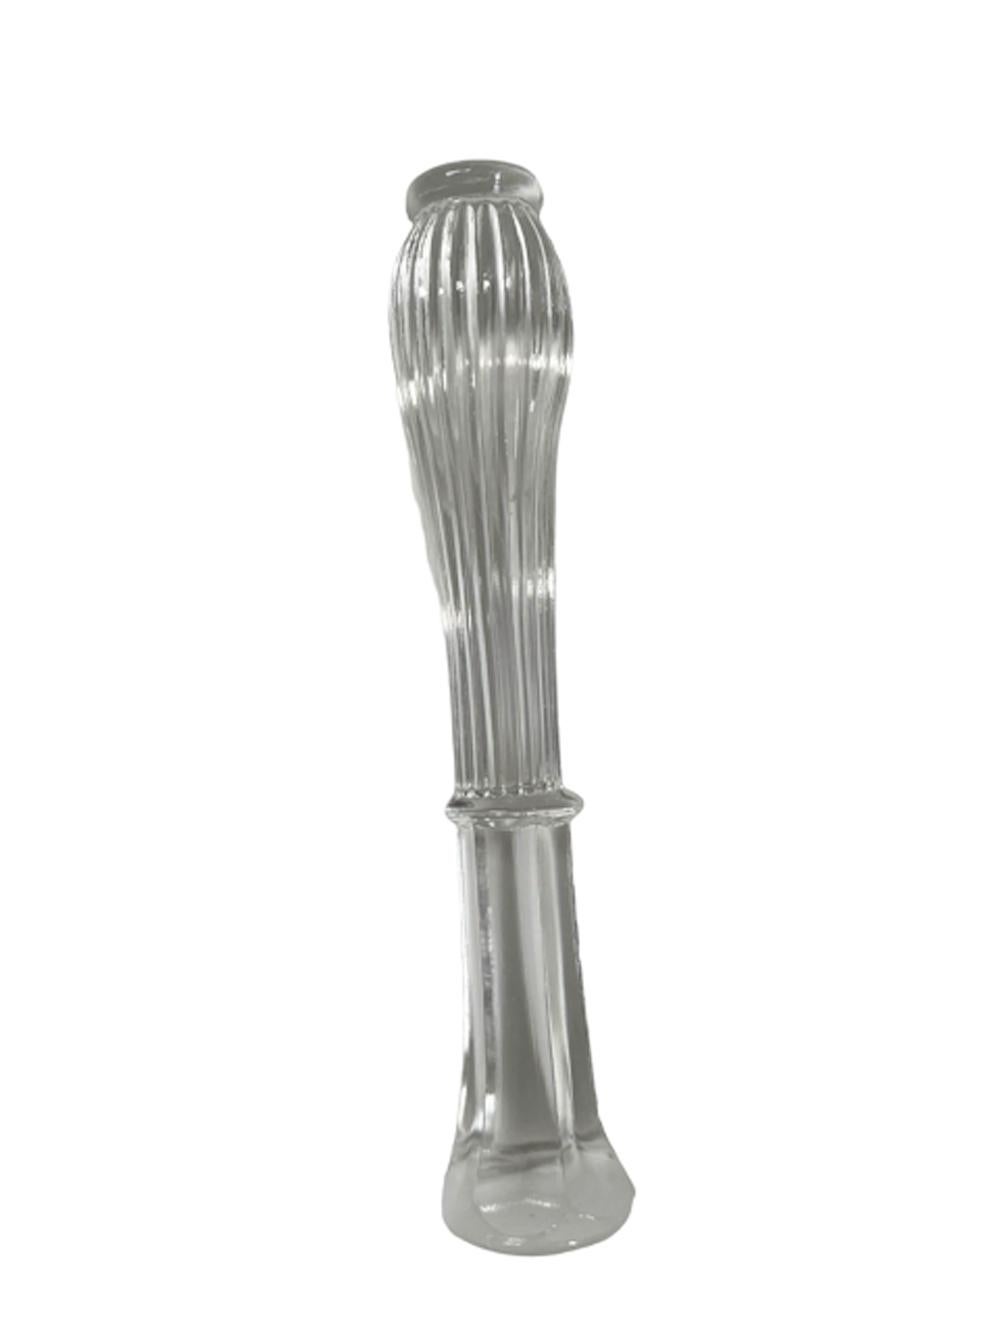 American Set of 6 Art Deco Colorless Glass Cocktail Muddlers of Reeded Baluster Form For Sale